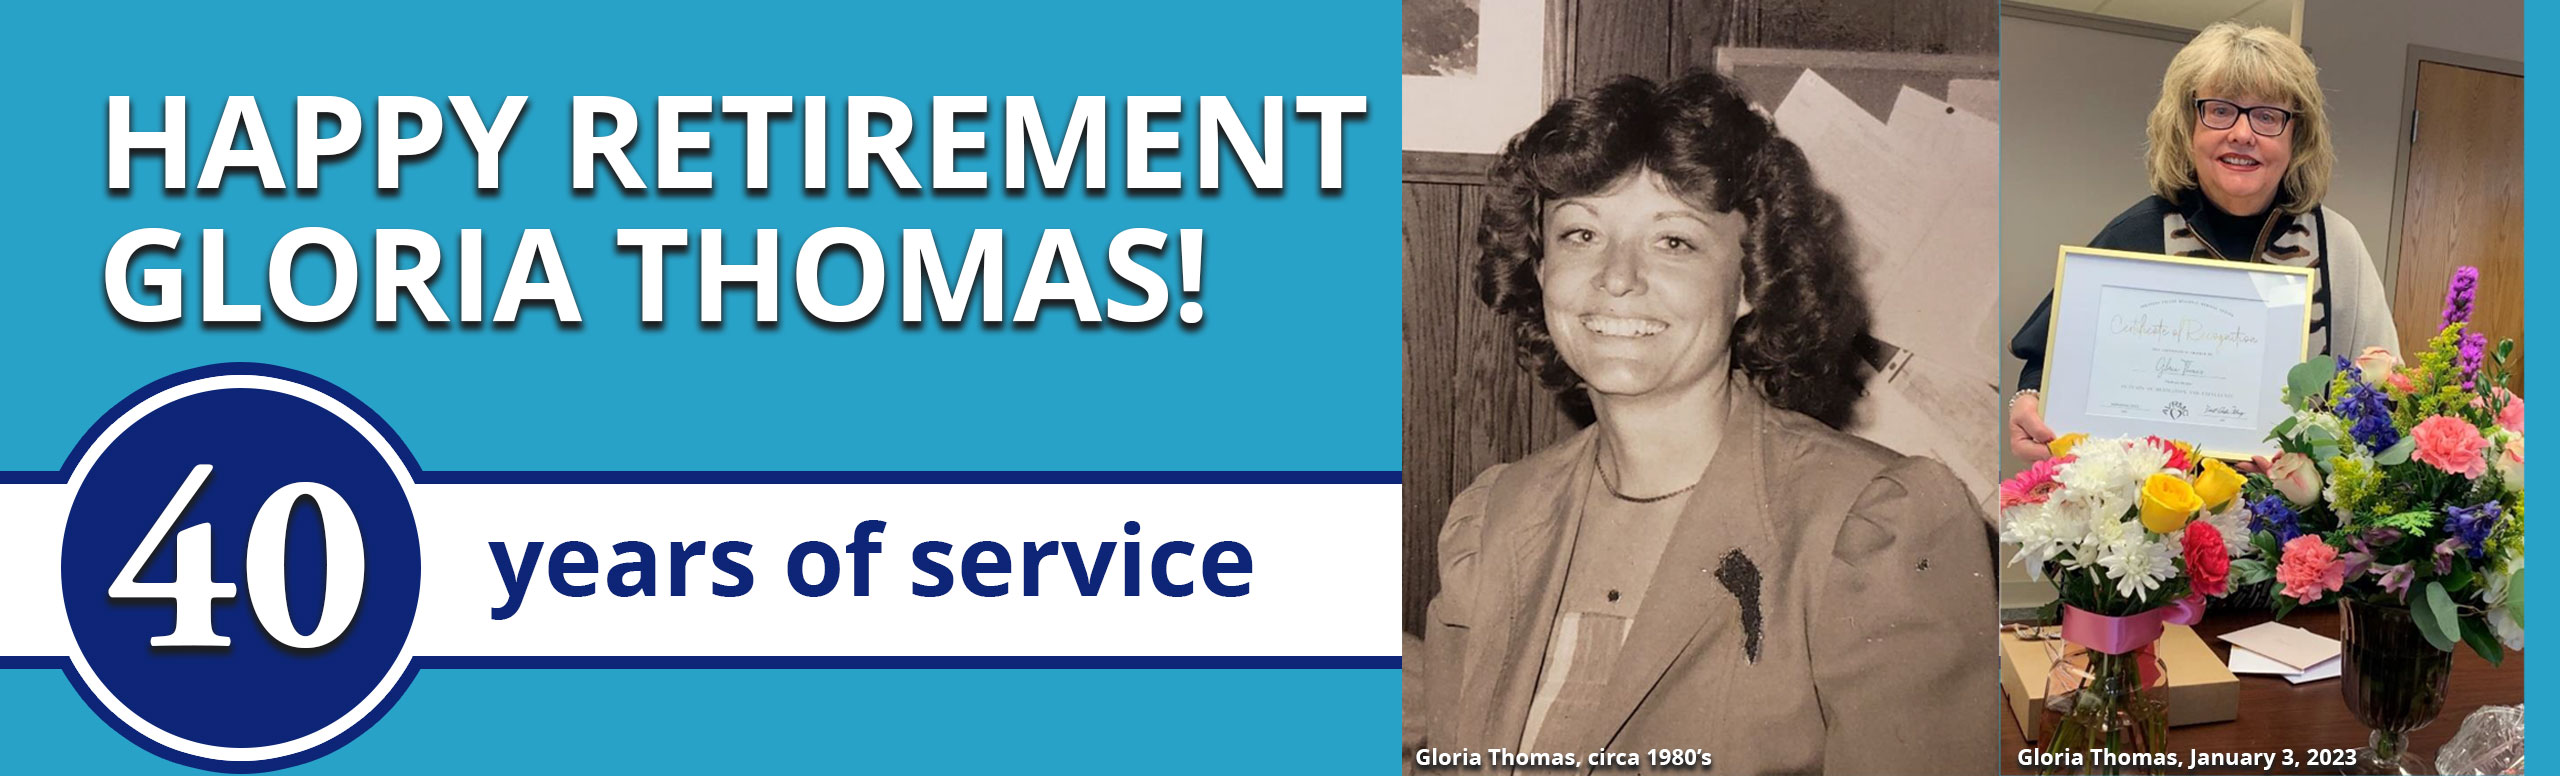 Happy Retirement Gloria Thomas! 

40 years of service.

Picture is Gloria in 1980 and a most recent picture.